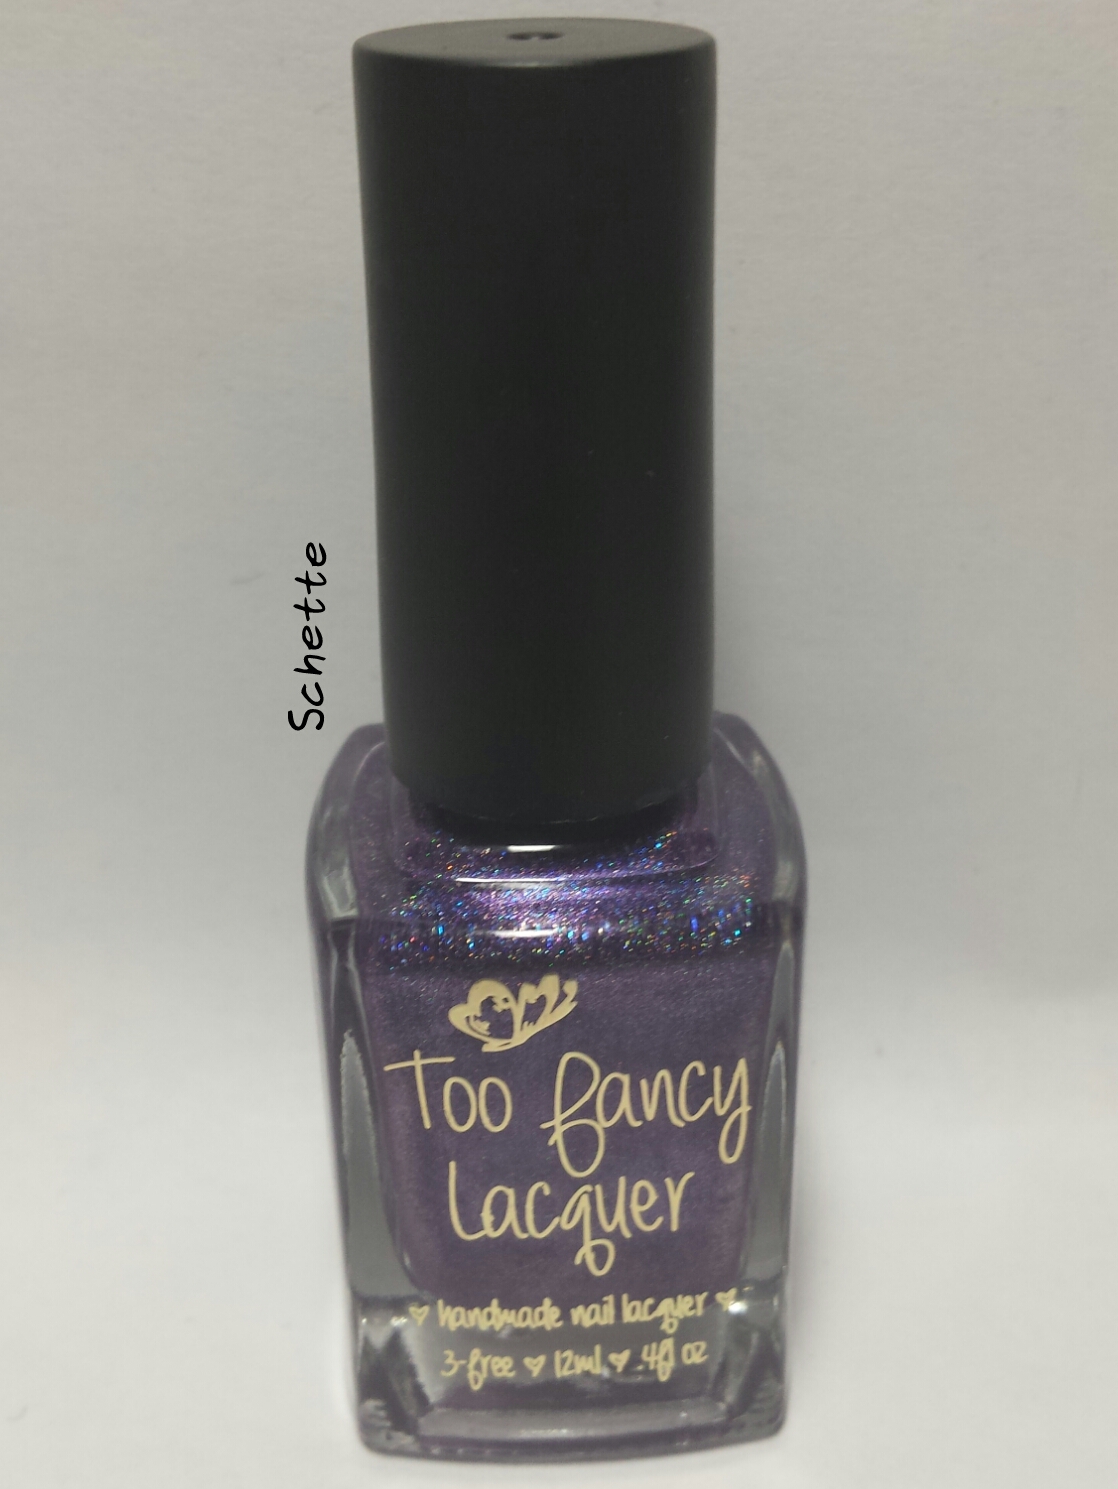 Le vernis Too Fancy Lacquer Mesmerized